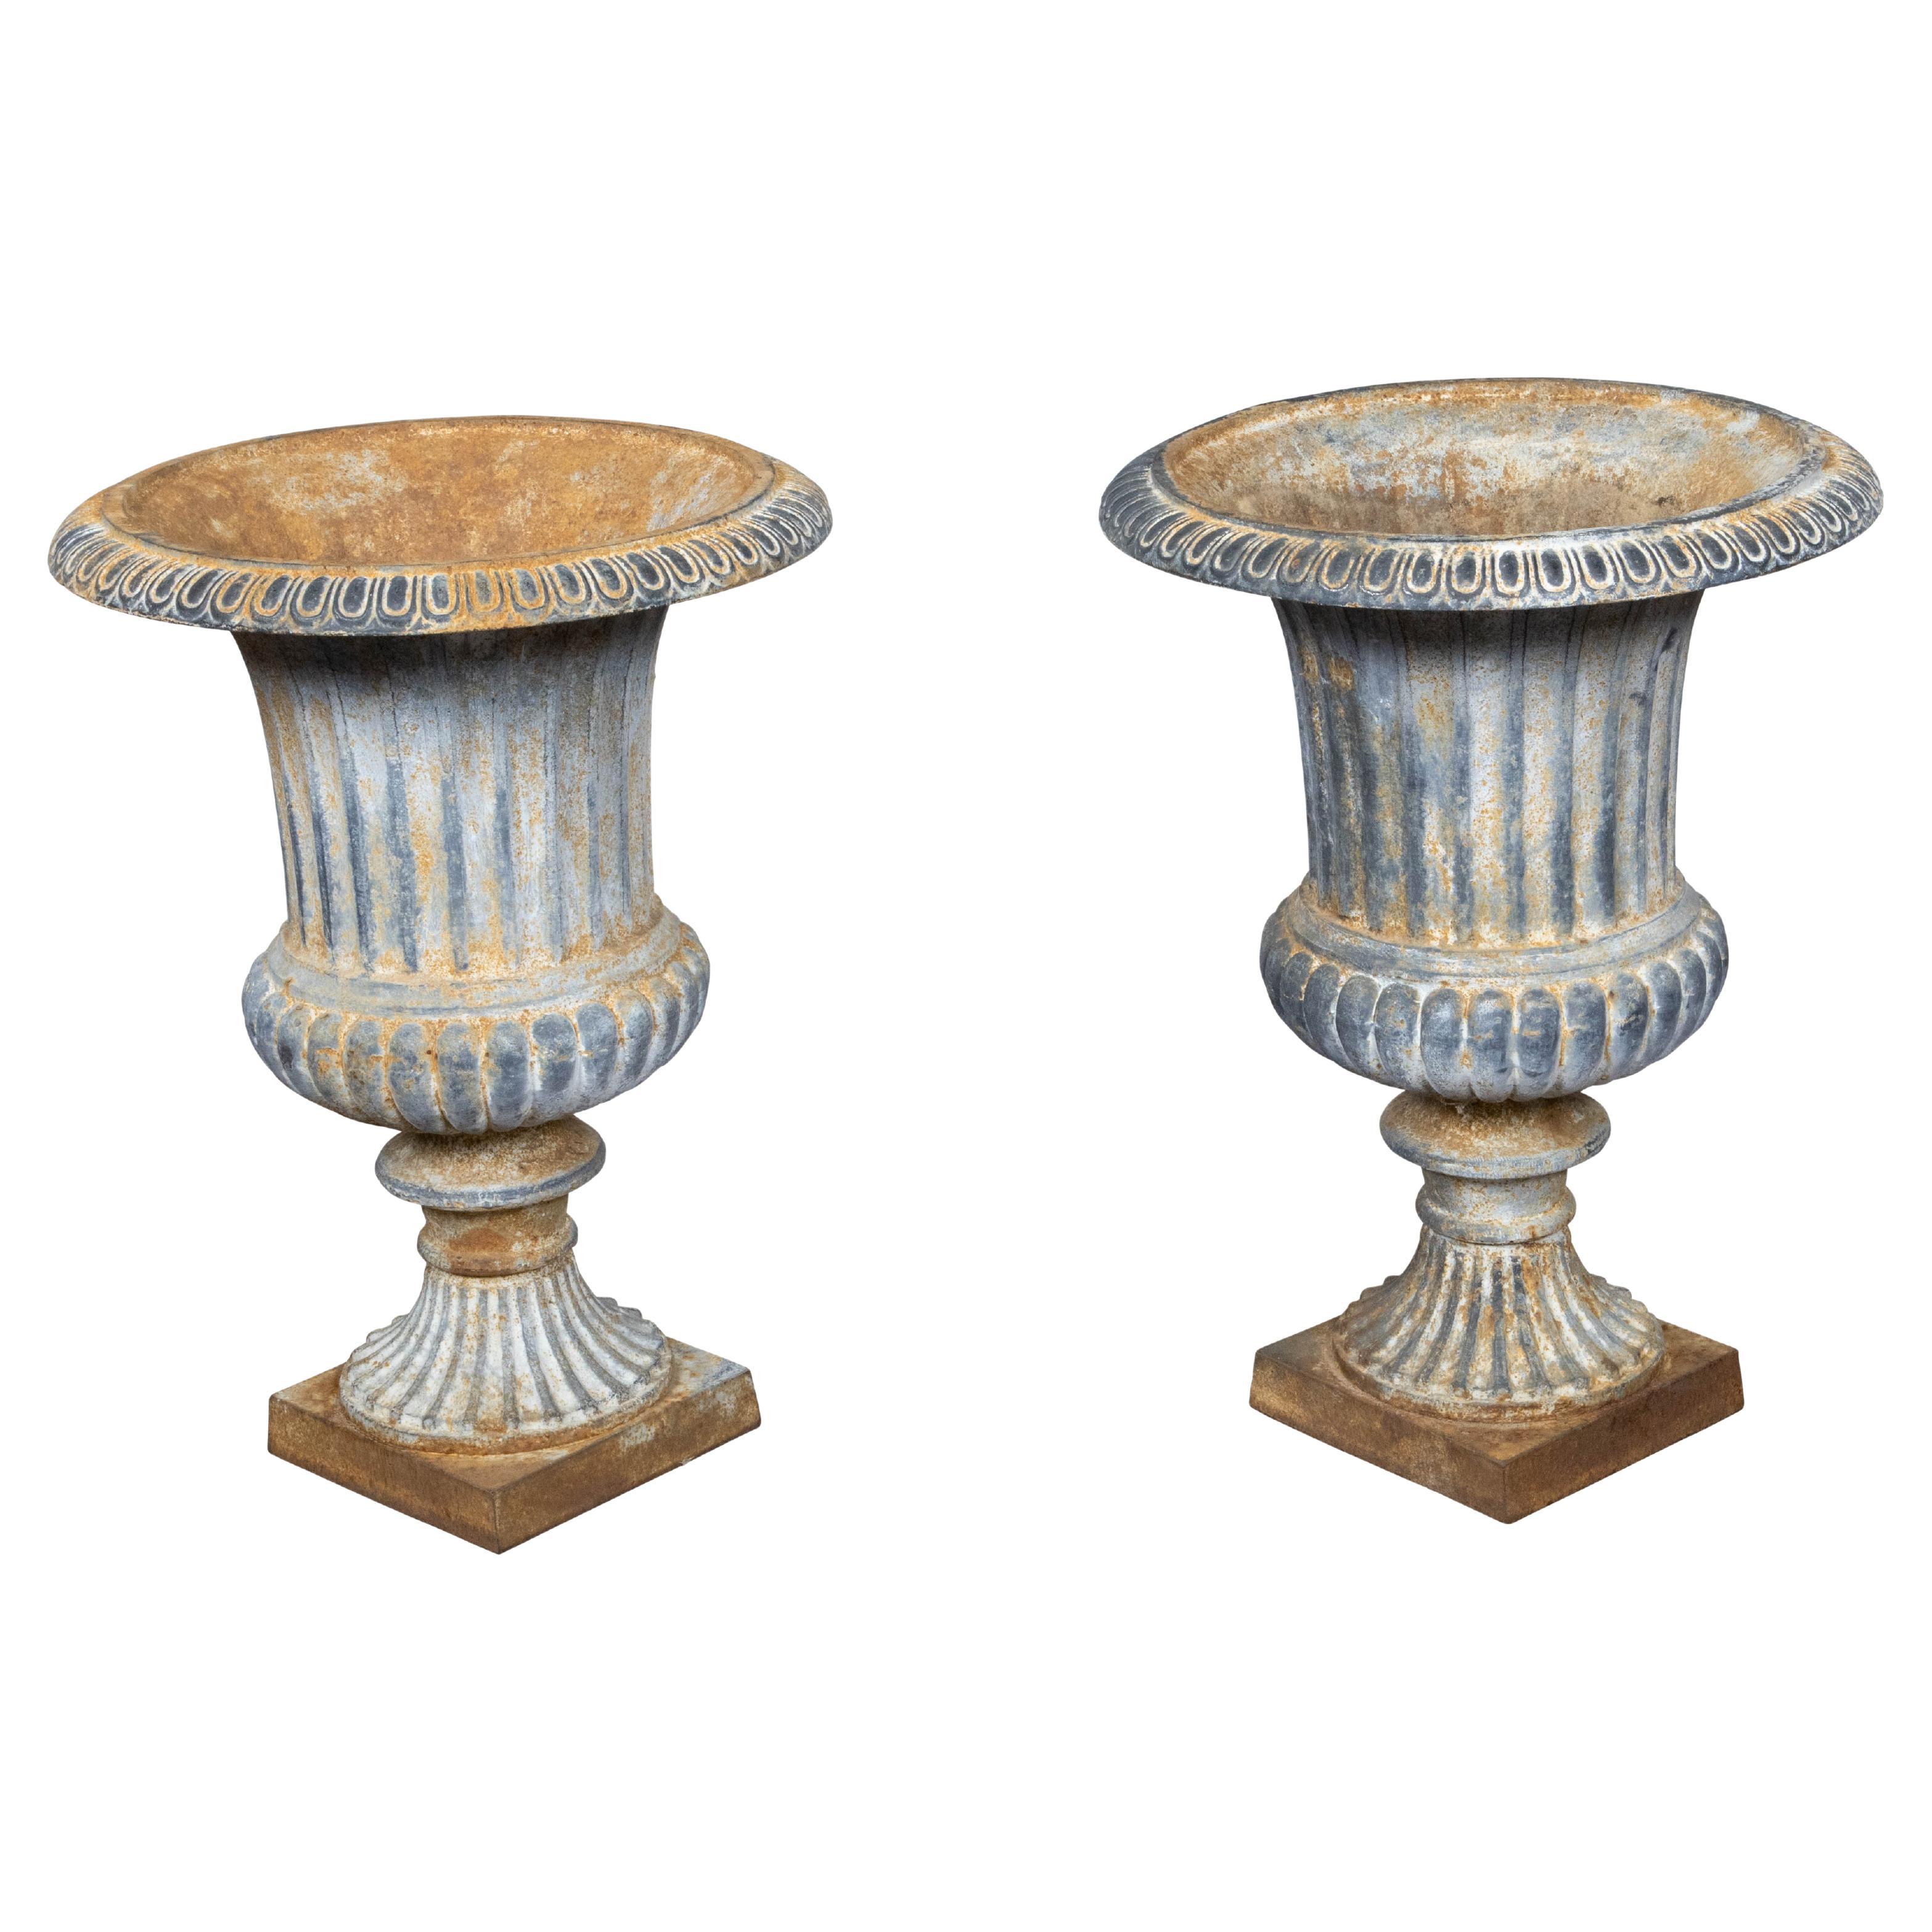 Pair of Turn of the Century French Medici Urn Cast Iron Planters with Patina For Sale